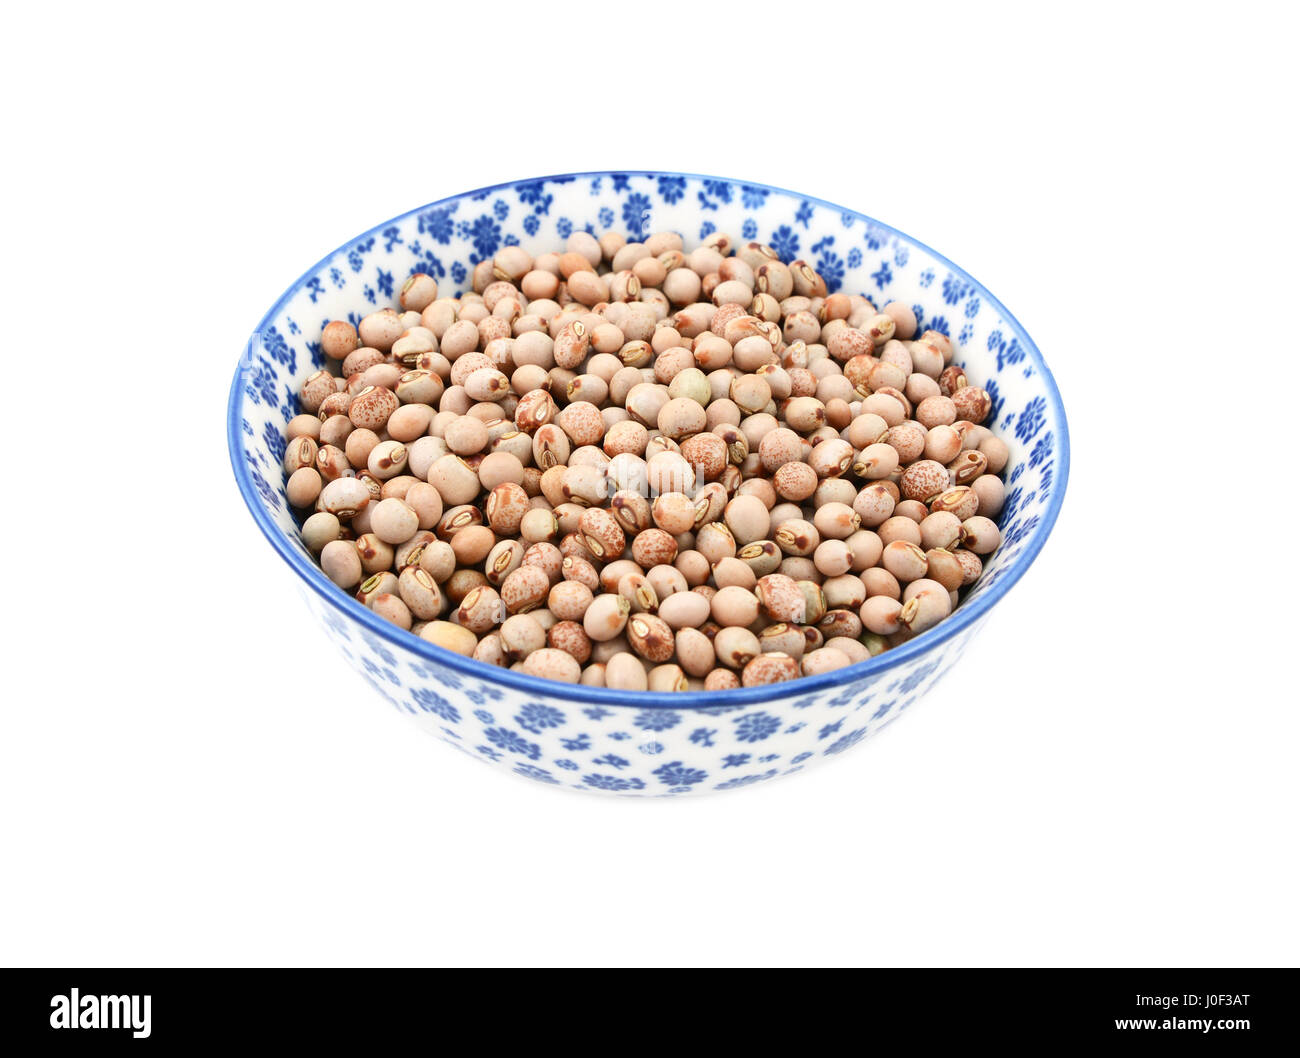 Pigeon peas in a blue and white porcelain bowl with a floral design, isolated on a white background Stock Photo